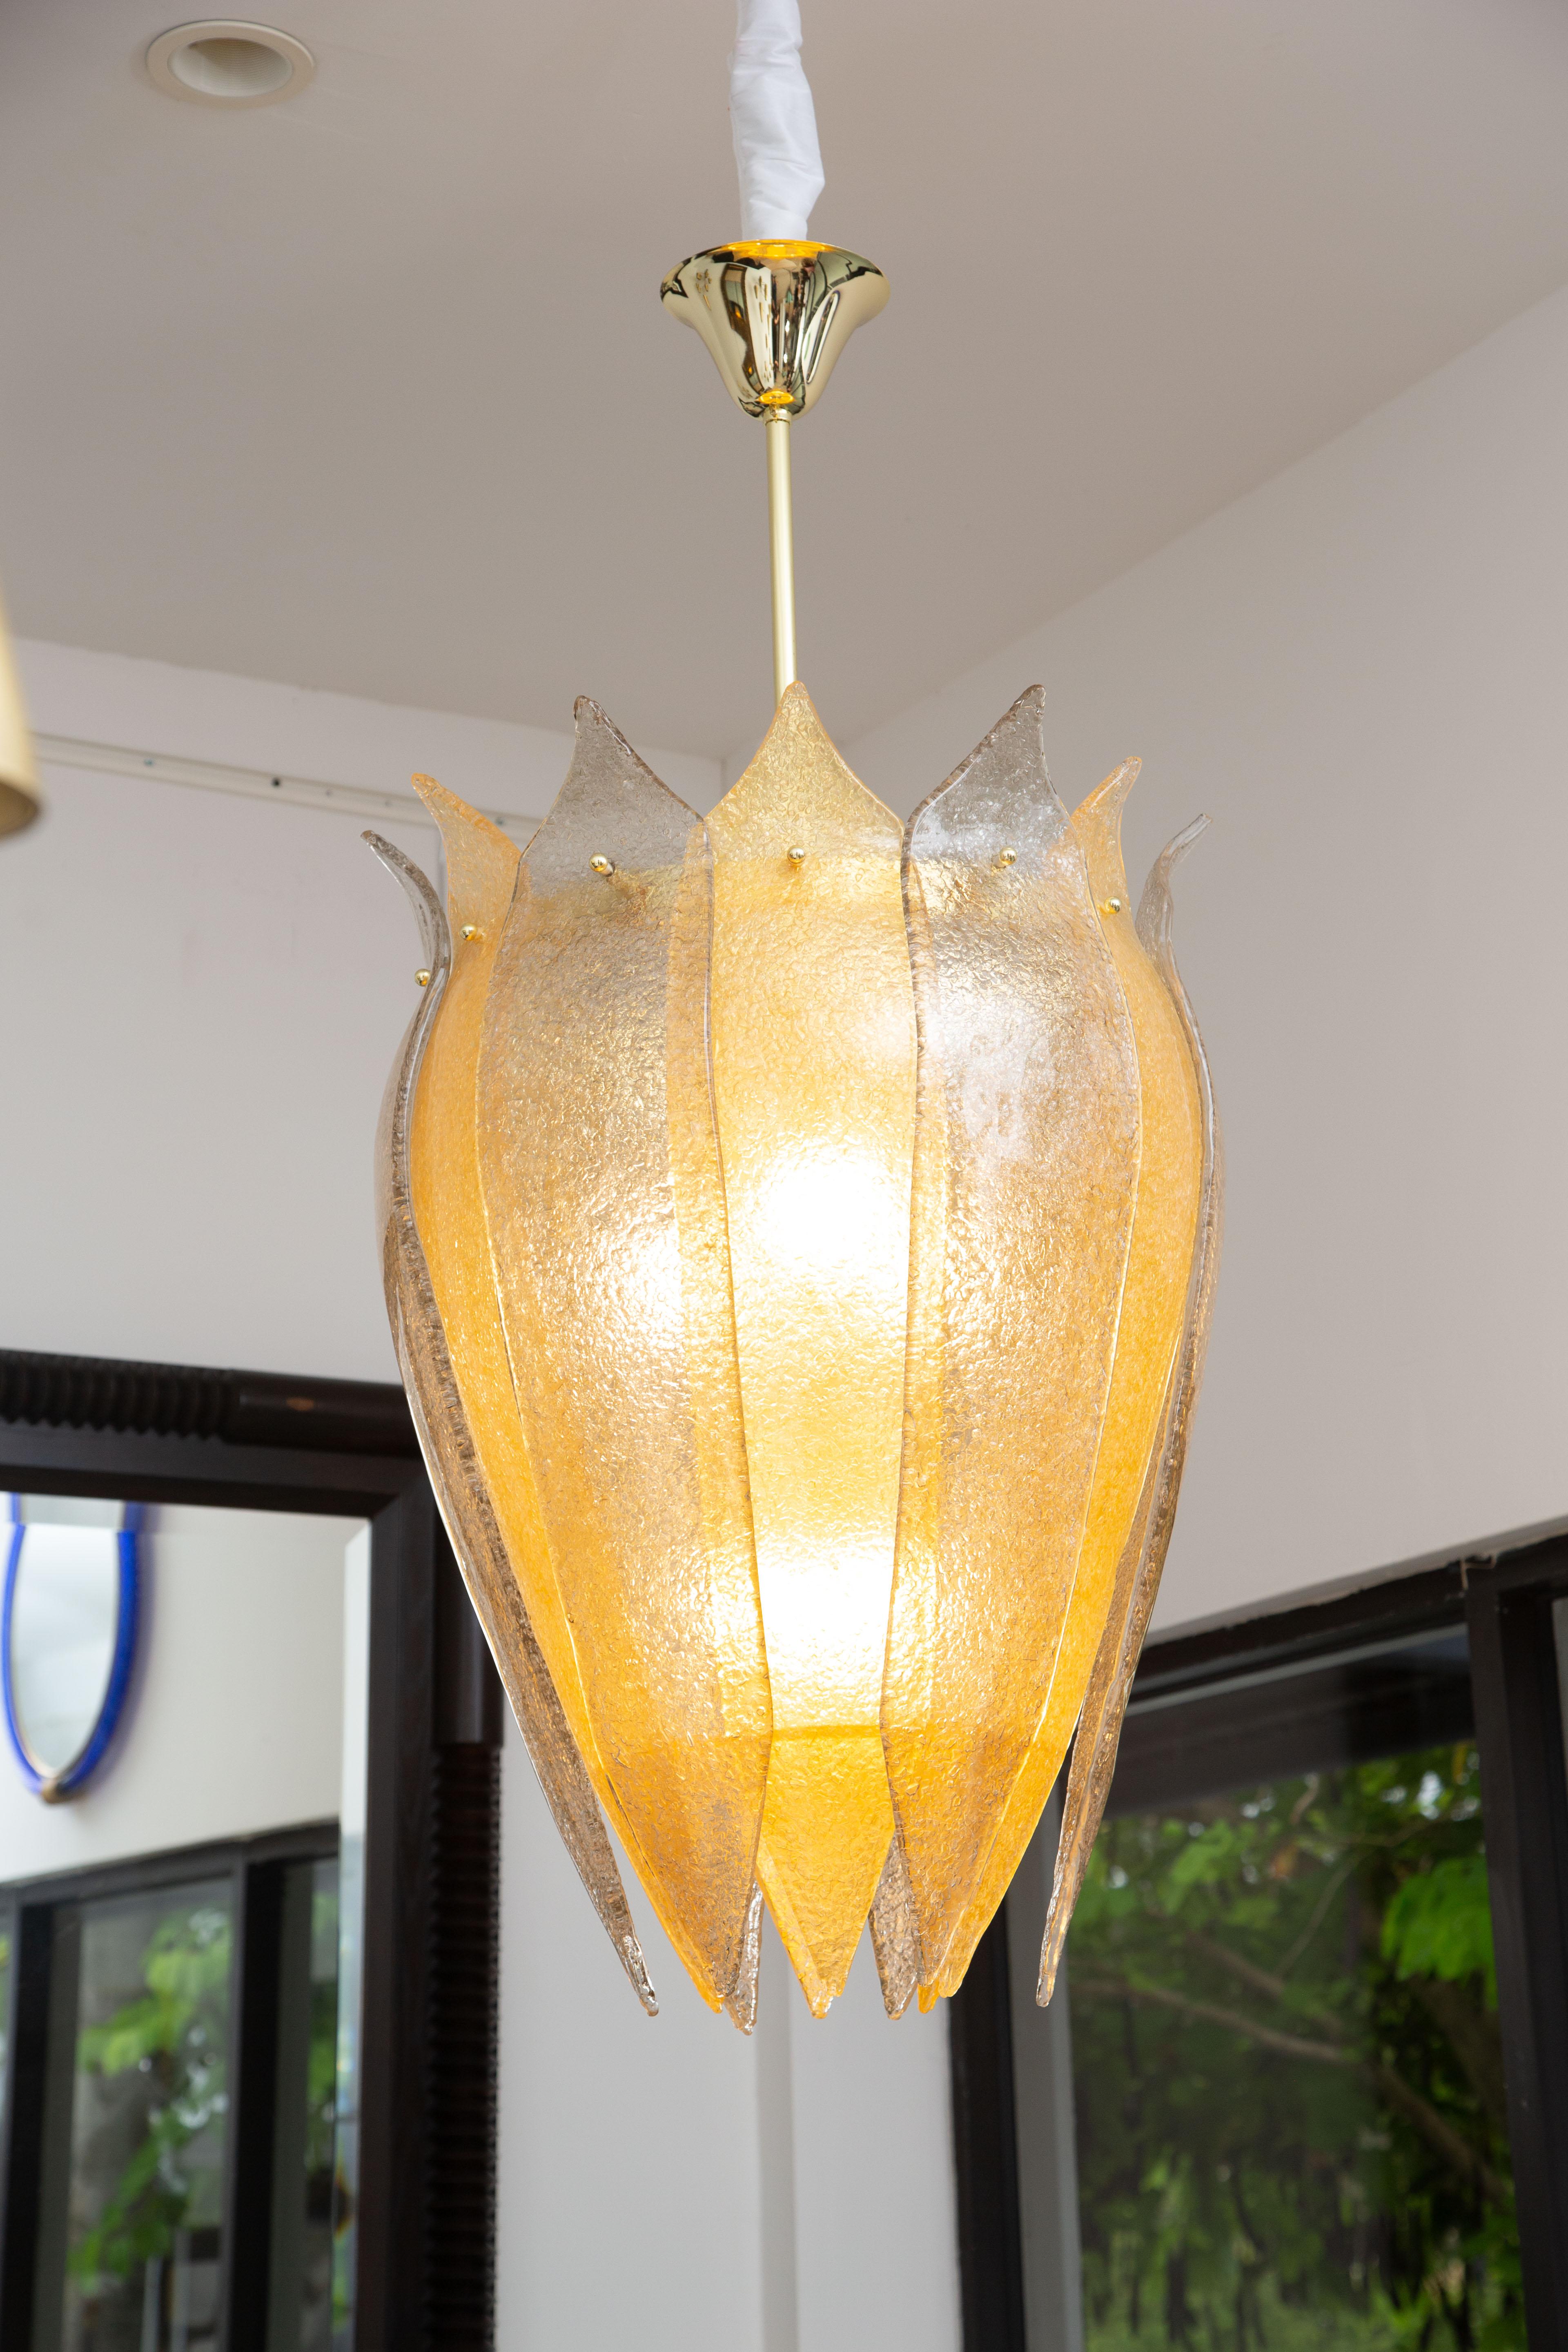 Murano glass lantern or cesendello, in stock
Curved form “graniglia” hand blown glass leaves in gold and smoked
Silhouette is inspired by the ancient street lanterns of Venice
Brass structure with a 48